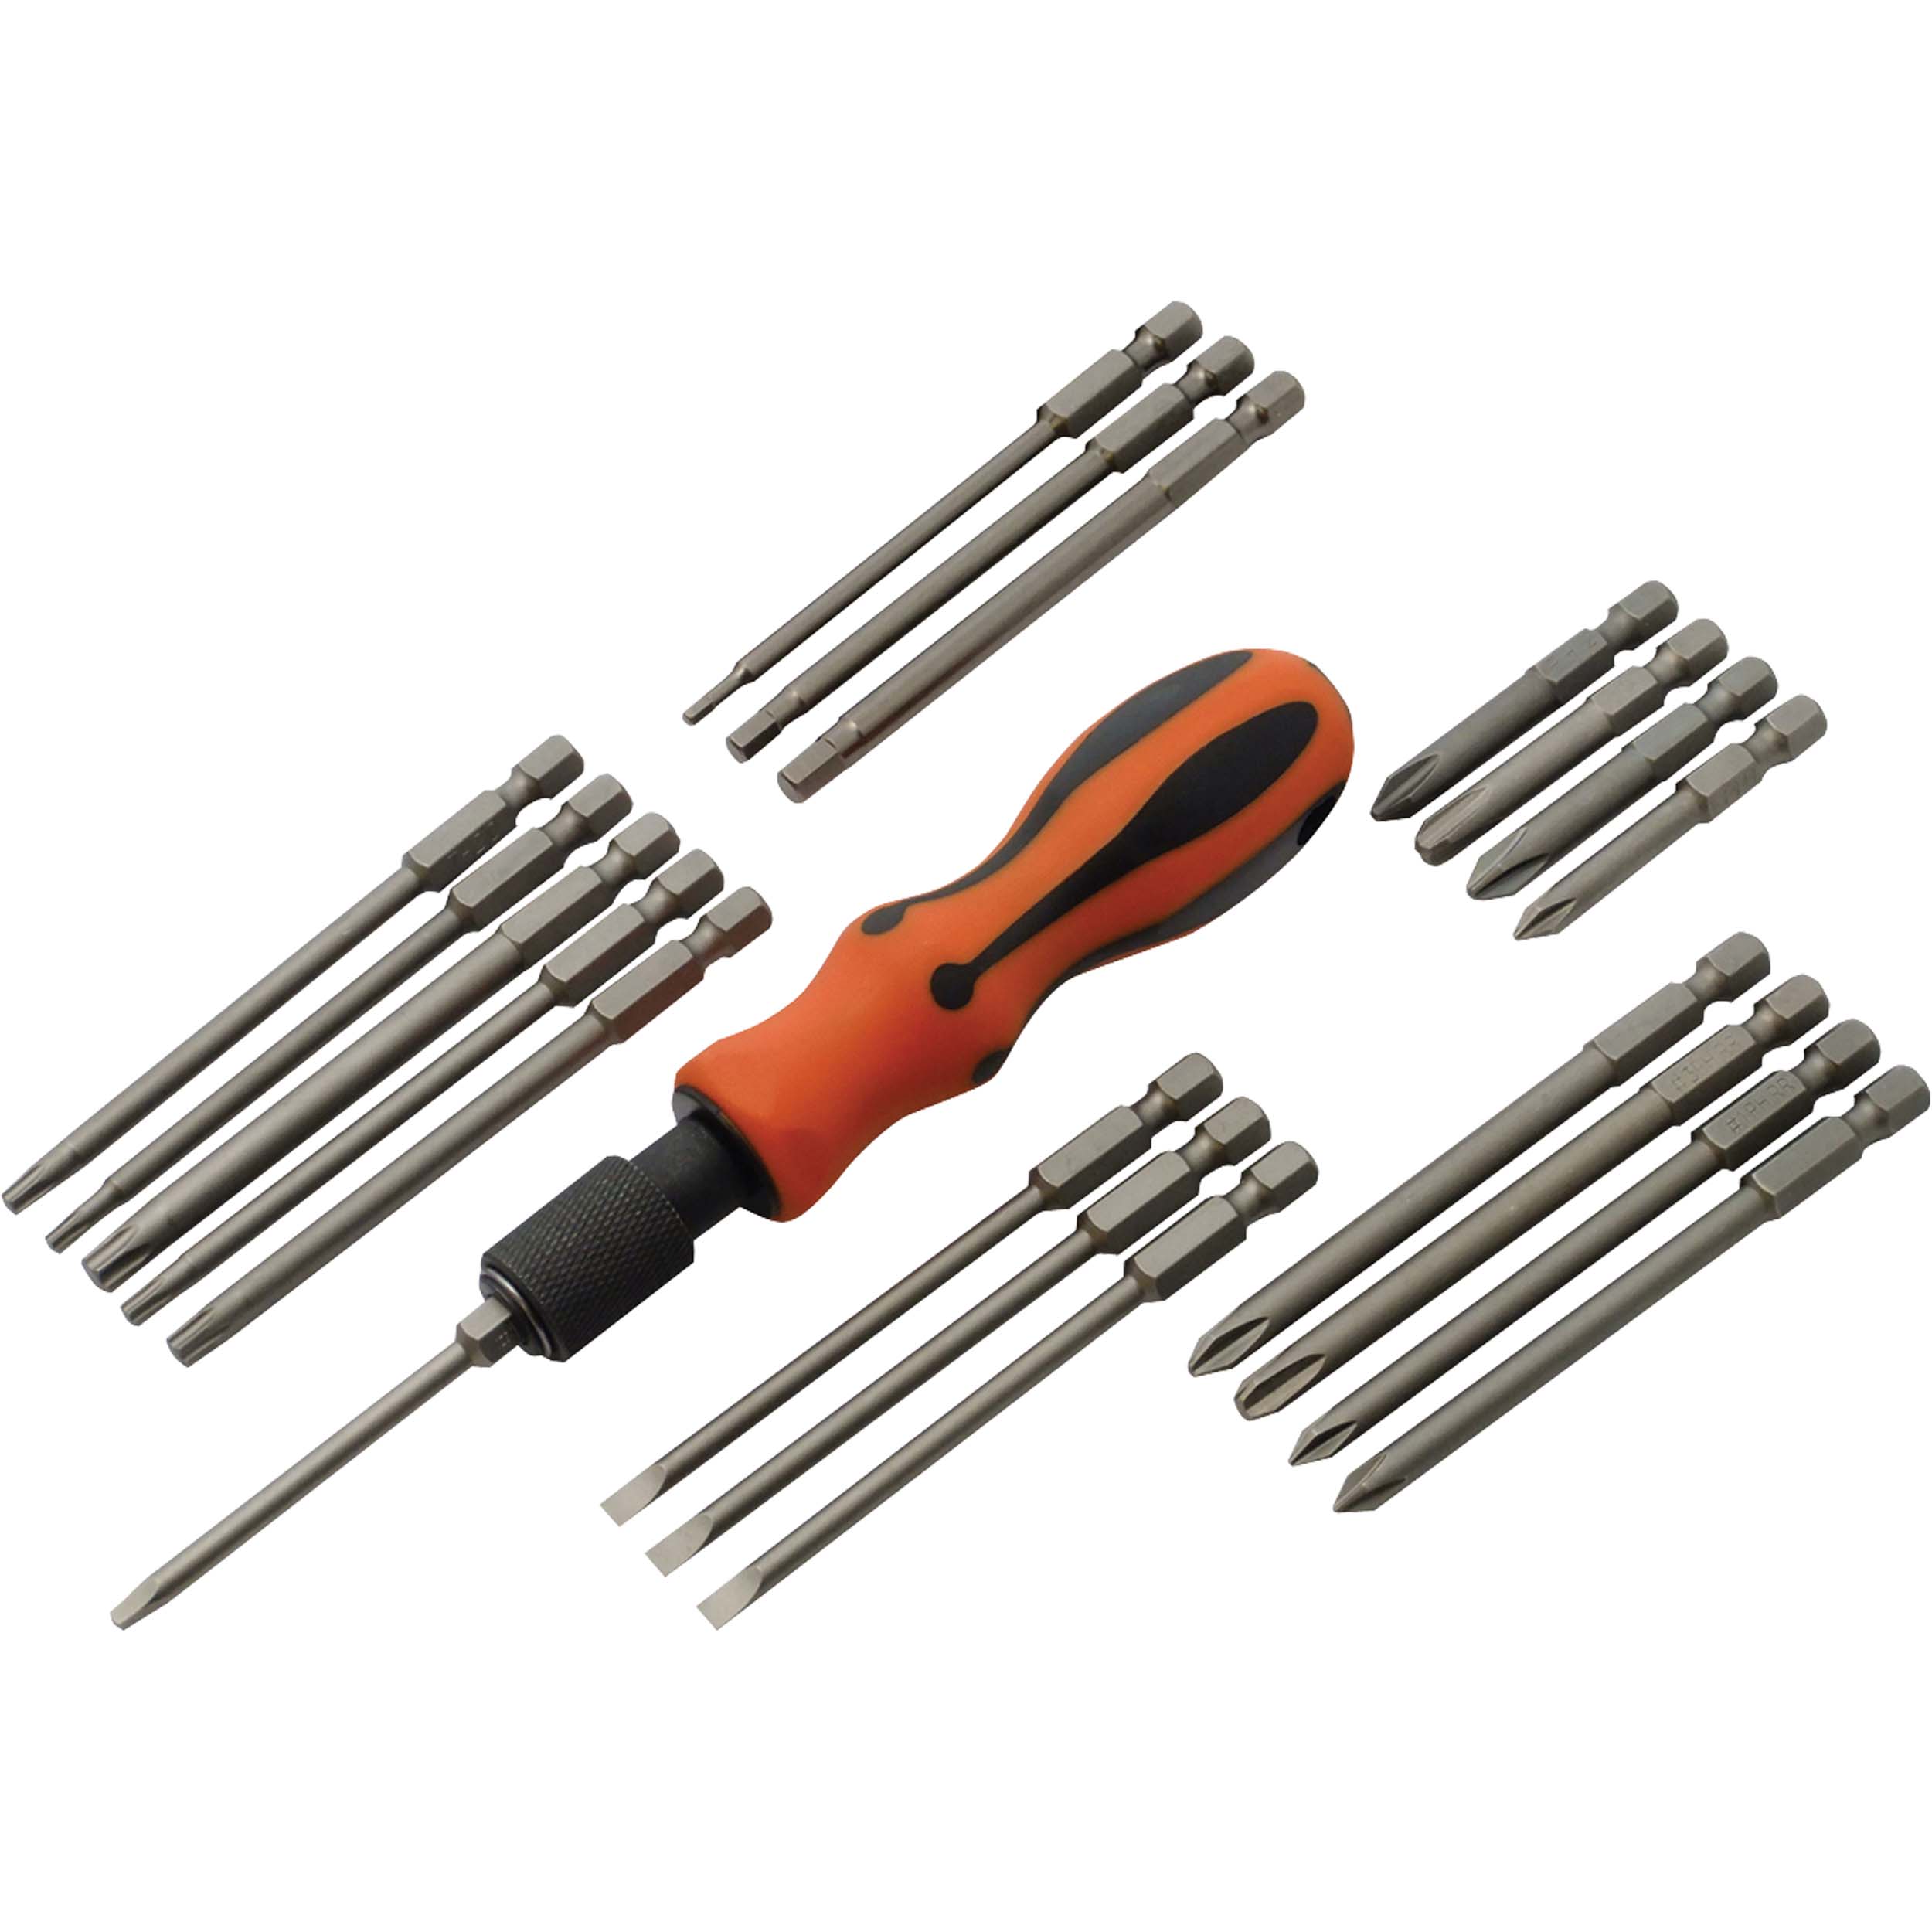 Tools 21pc Screwdriver Set With Removable Bits With Comfort Grip Handles